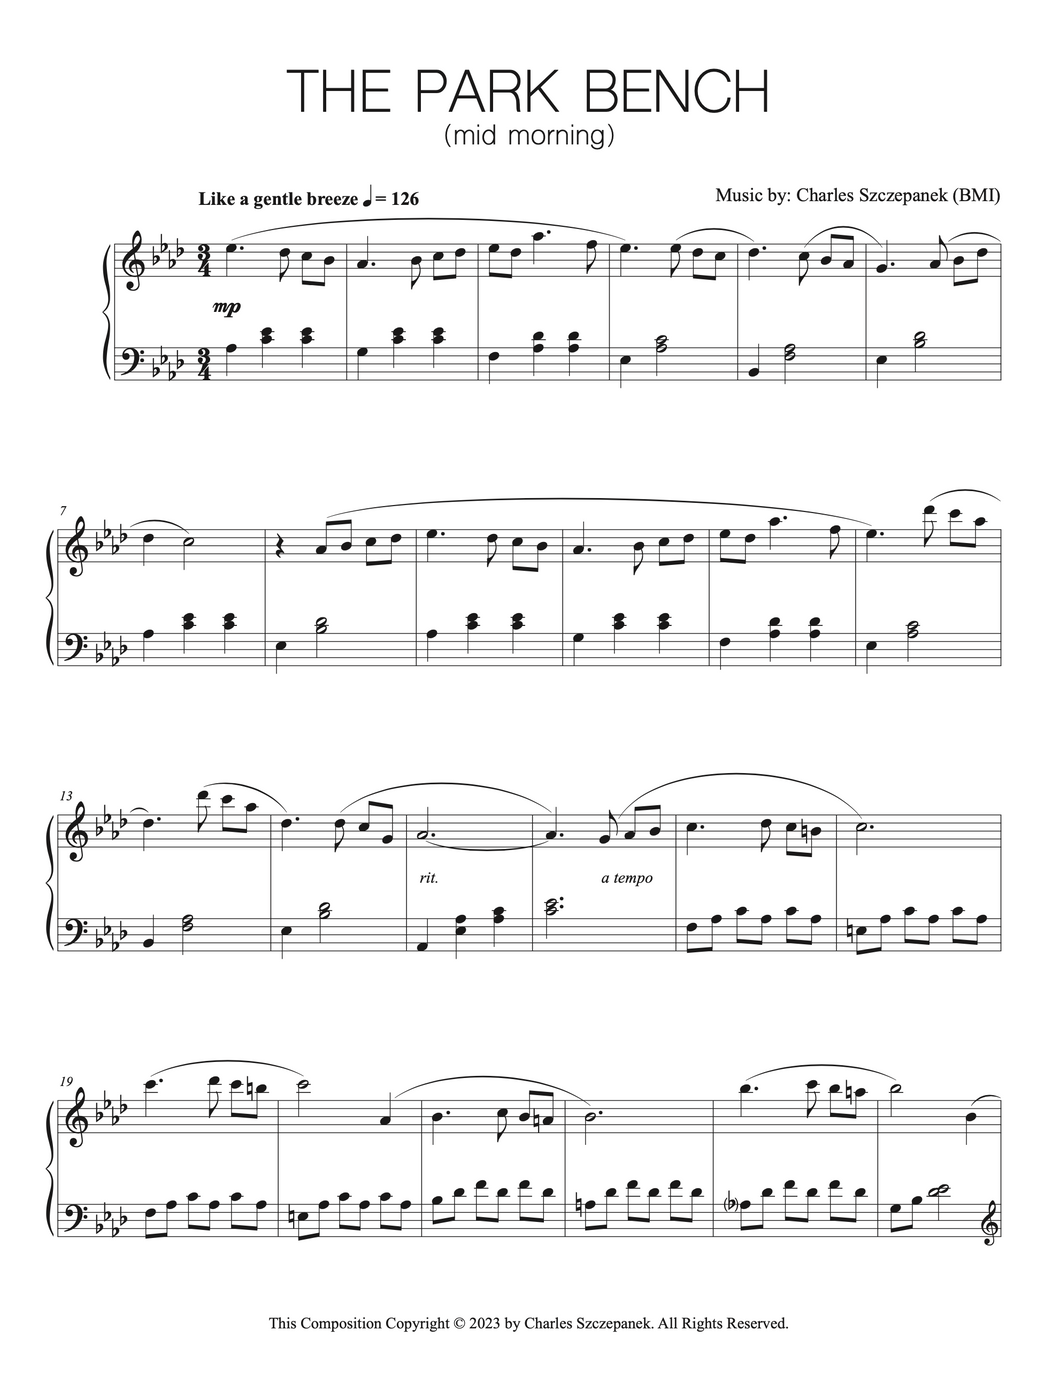 The Park Bench (mid morning) - Sheet Music for Solo Piano